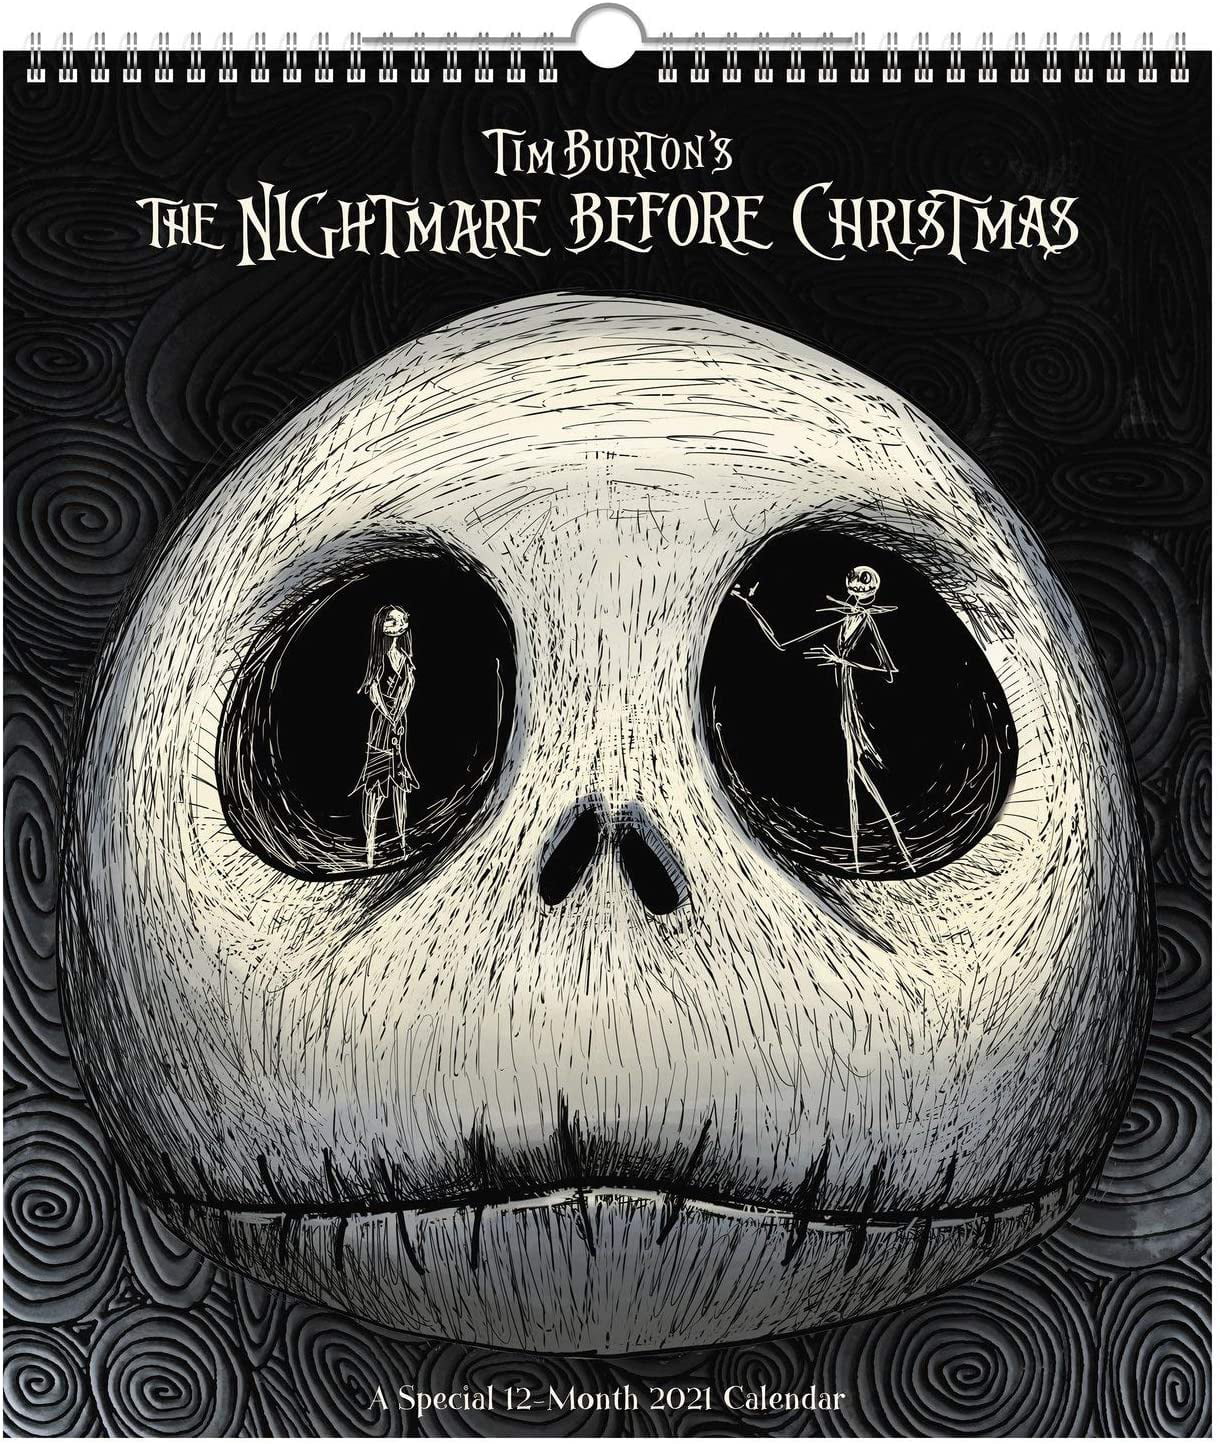 Details about   Official Disney Nightmare Before Christmas 2021 Wall Calendar 11.8 x 11.8 inches 